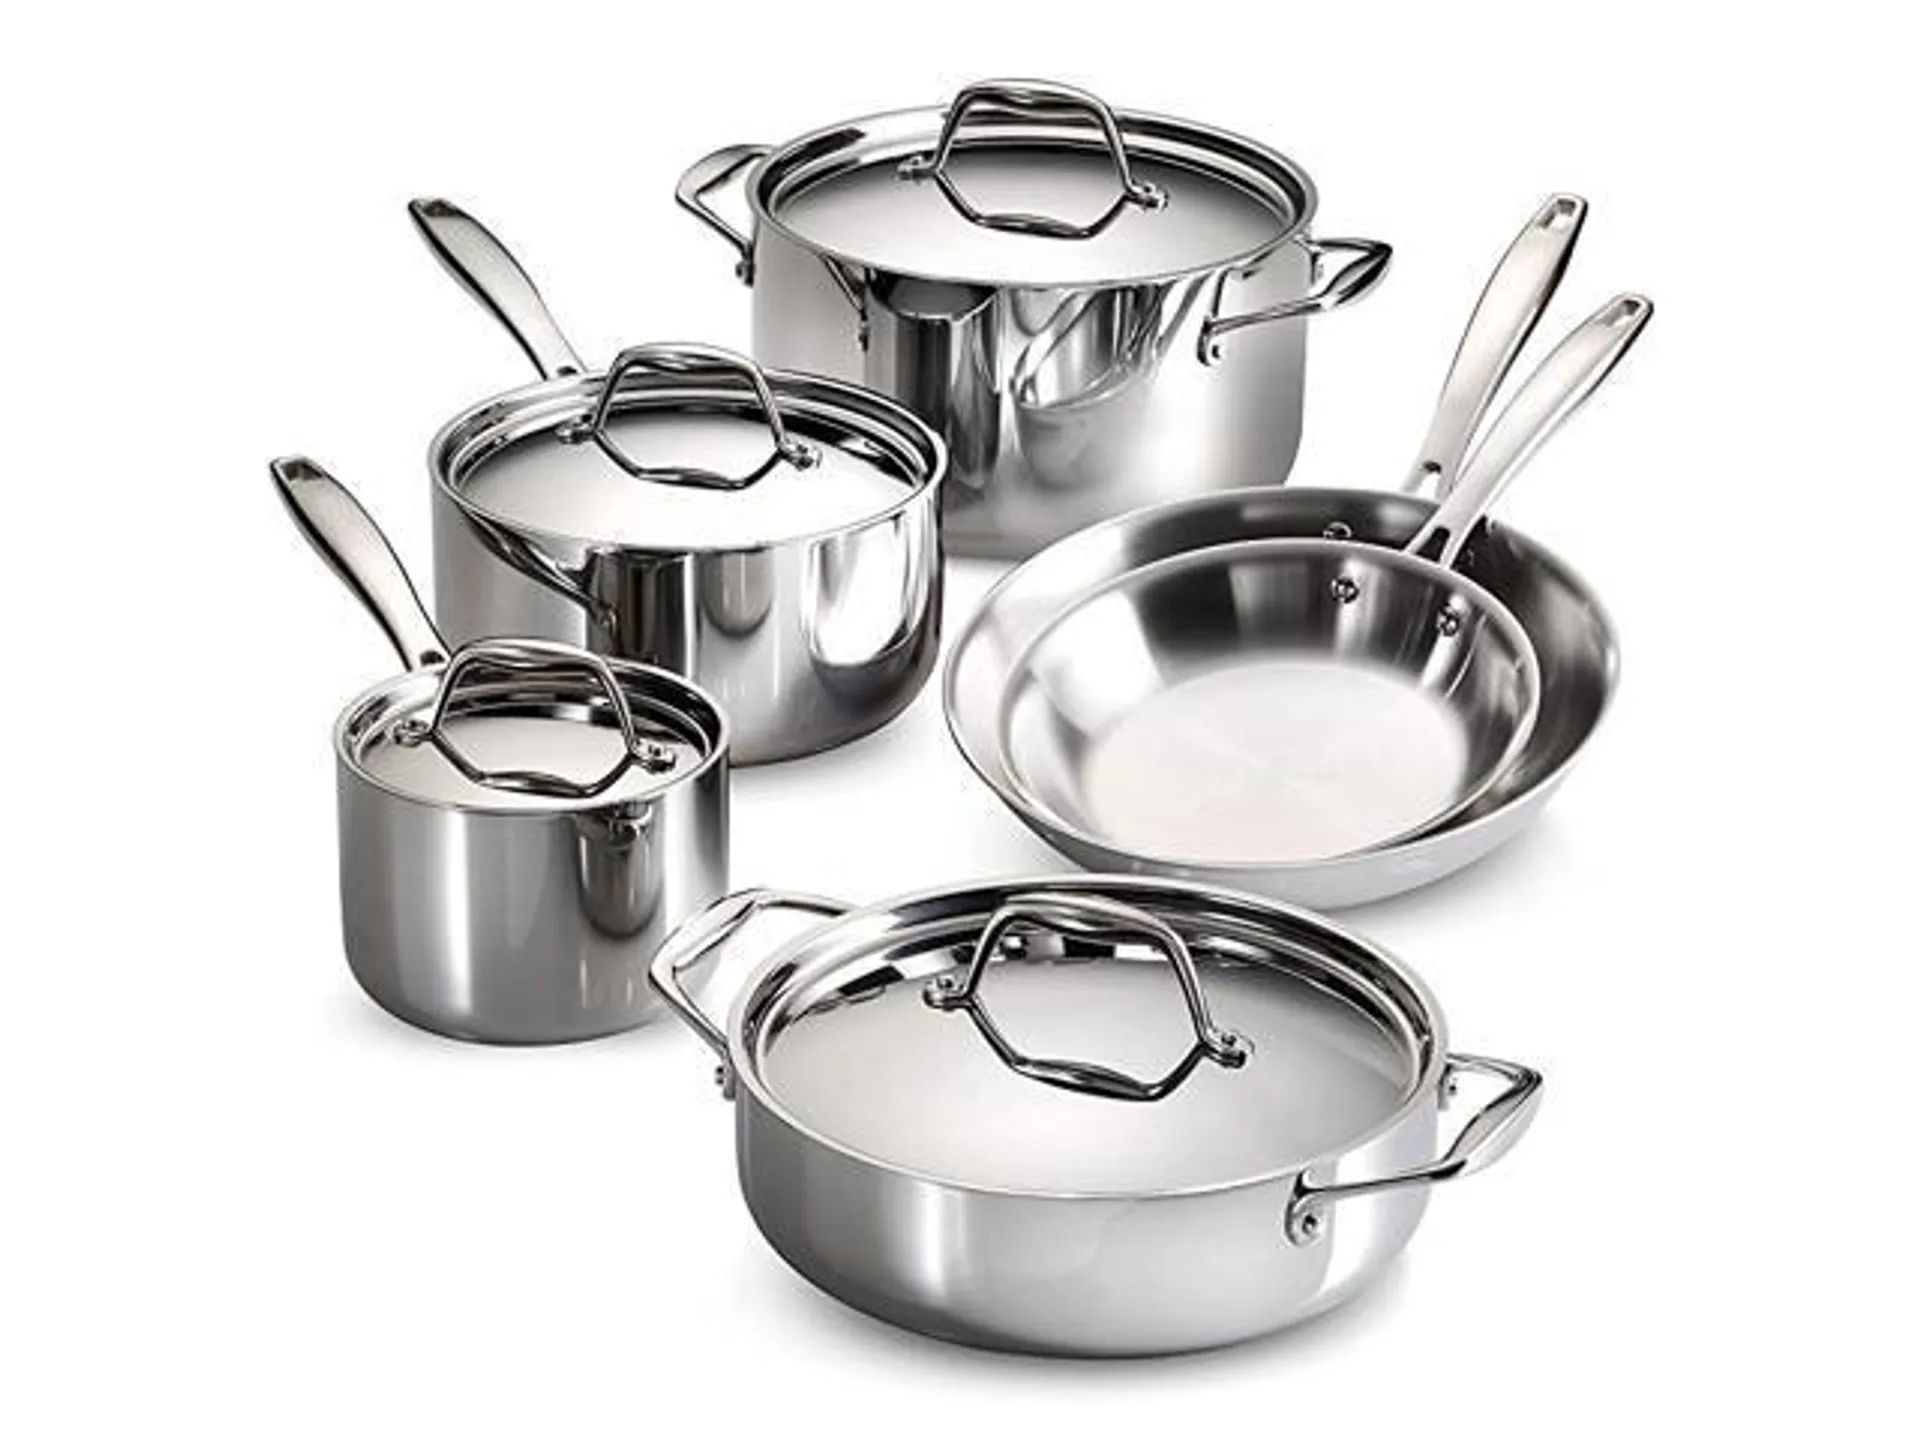 80116/248DS Gourmet Stainless Steel Induction-Ready Tri-Ply Clad 10-Piece Cookware Set, NSF-Certified, Made in Brazil